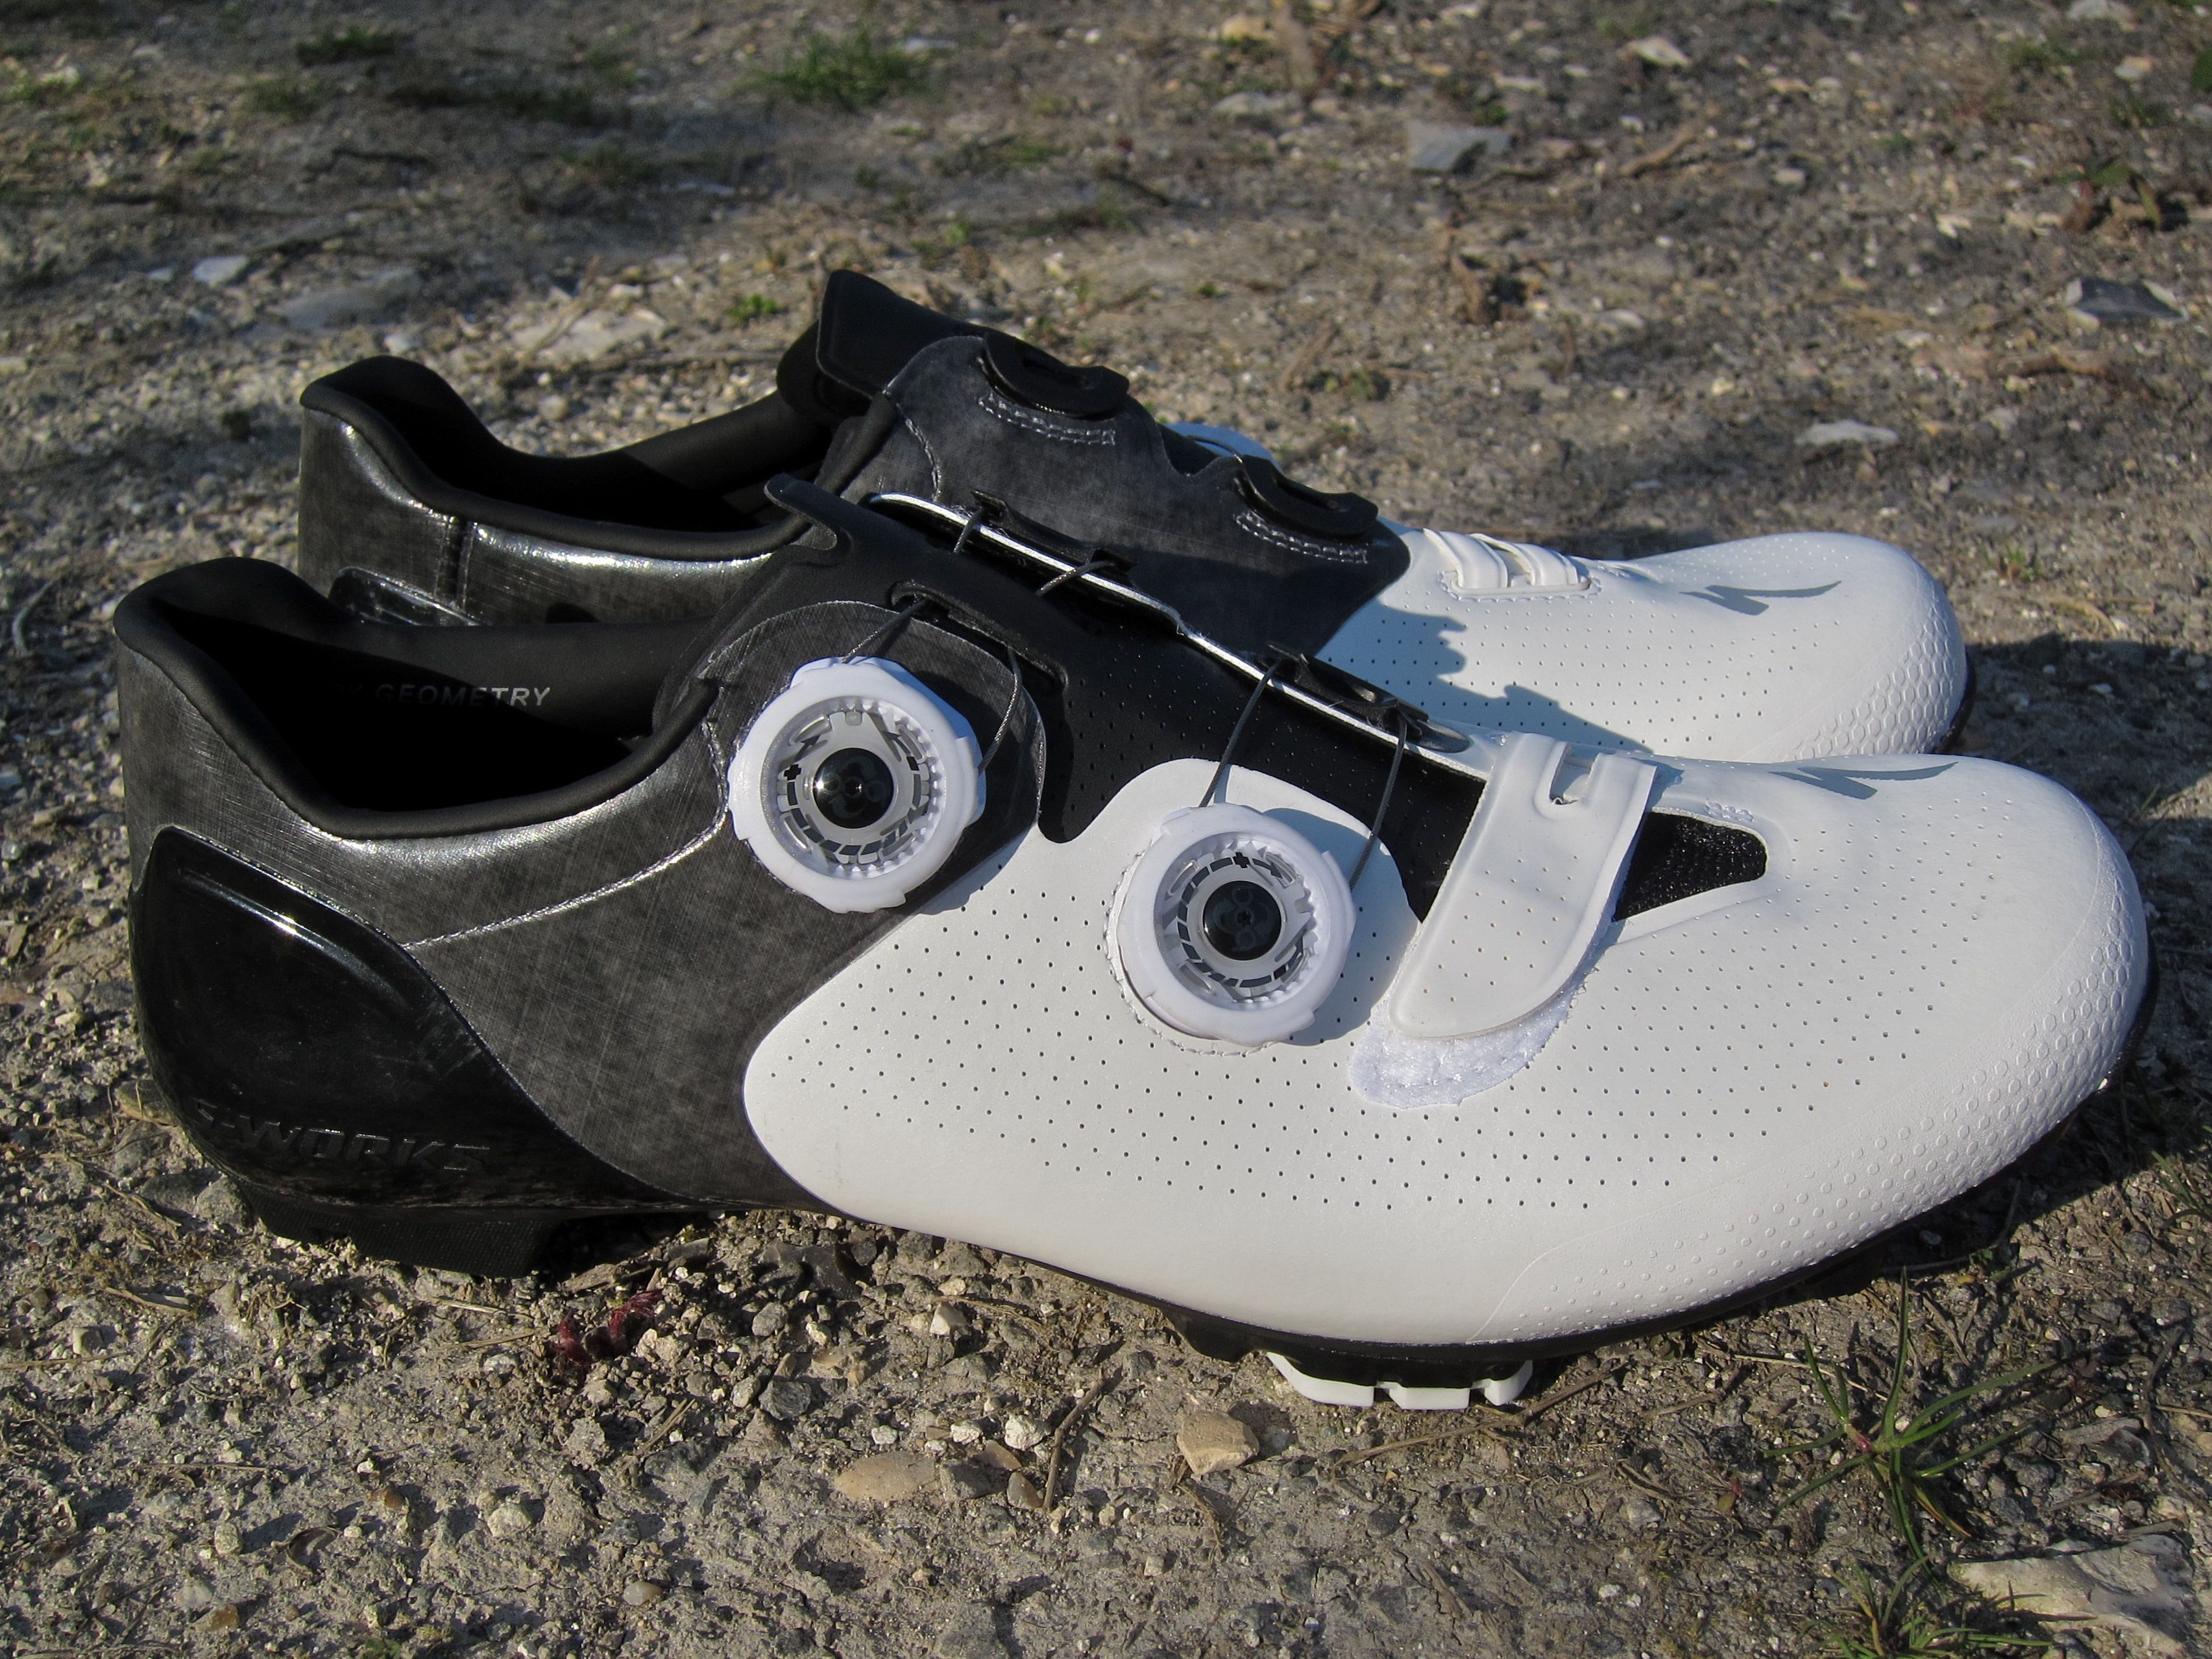 Review: Specialized S-Works 6 XC shoes 